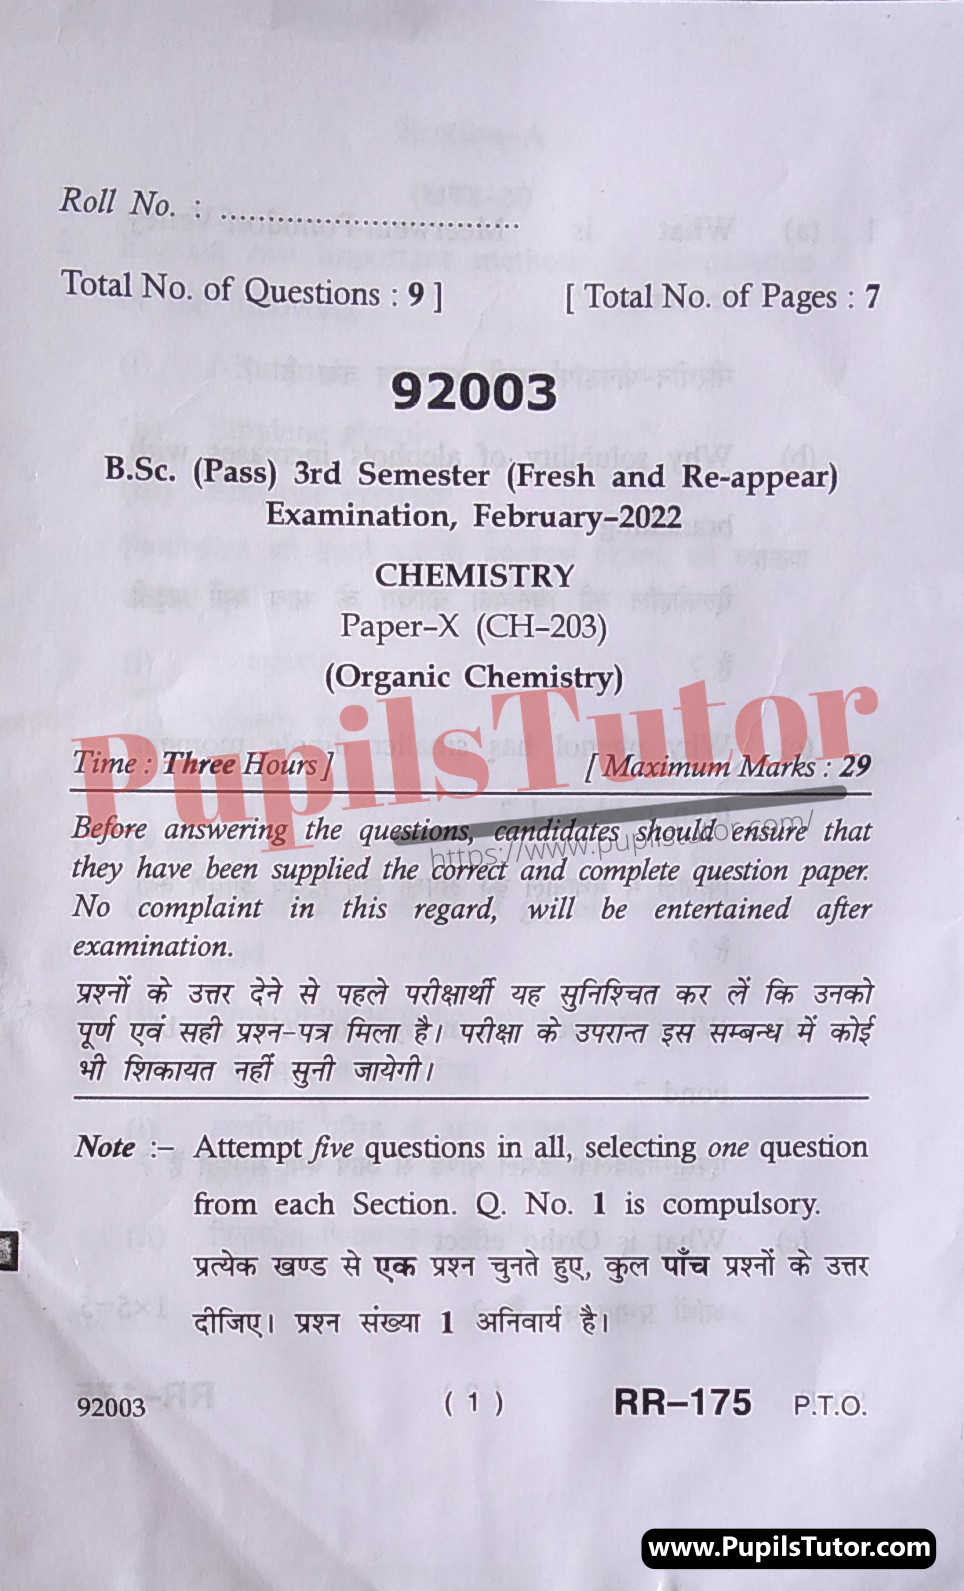 MDU (Maharshi Dayanand University, Rohtak Haryana) BSc Chemistry Pass Course Third Semester Previous Year Organic Chemistry Question Paper For February, 2022 Exam (Question Paper Page 1) - pupilstutor.com